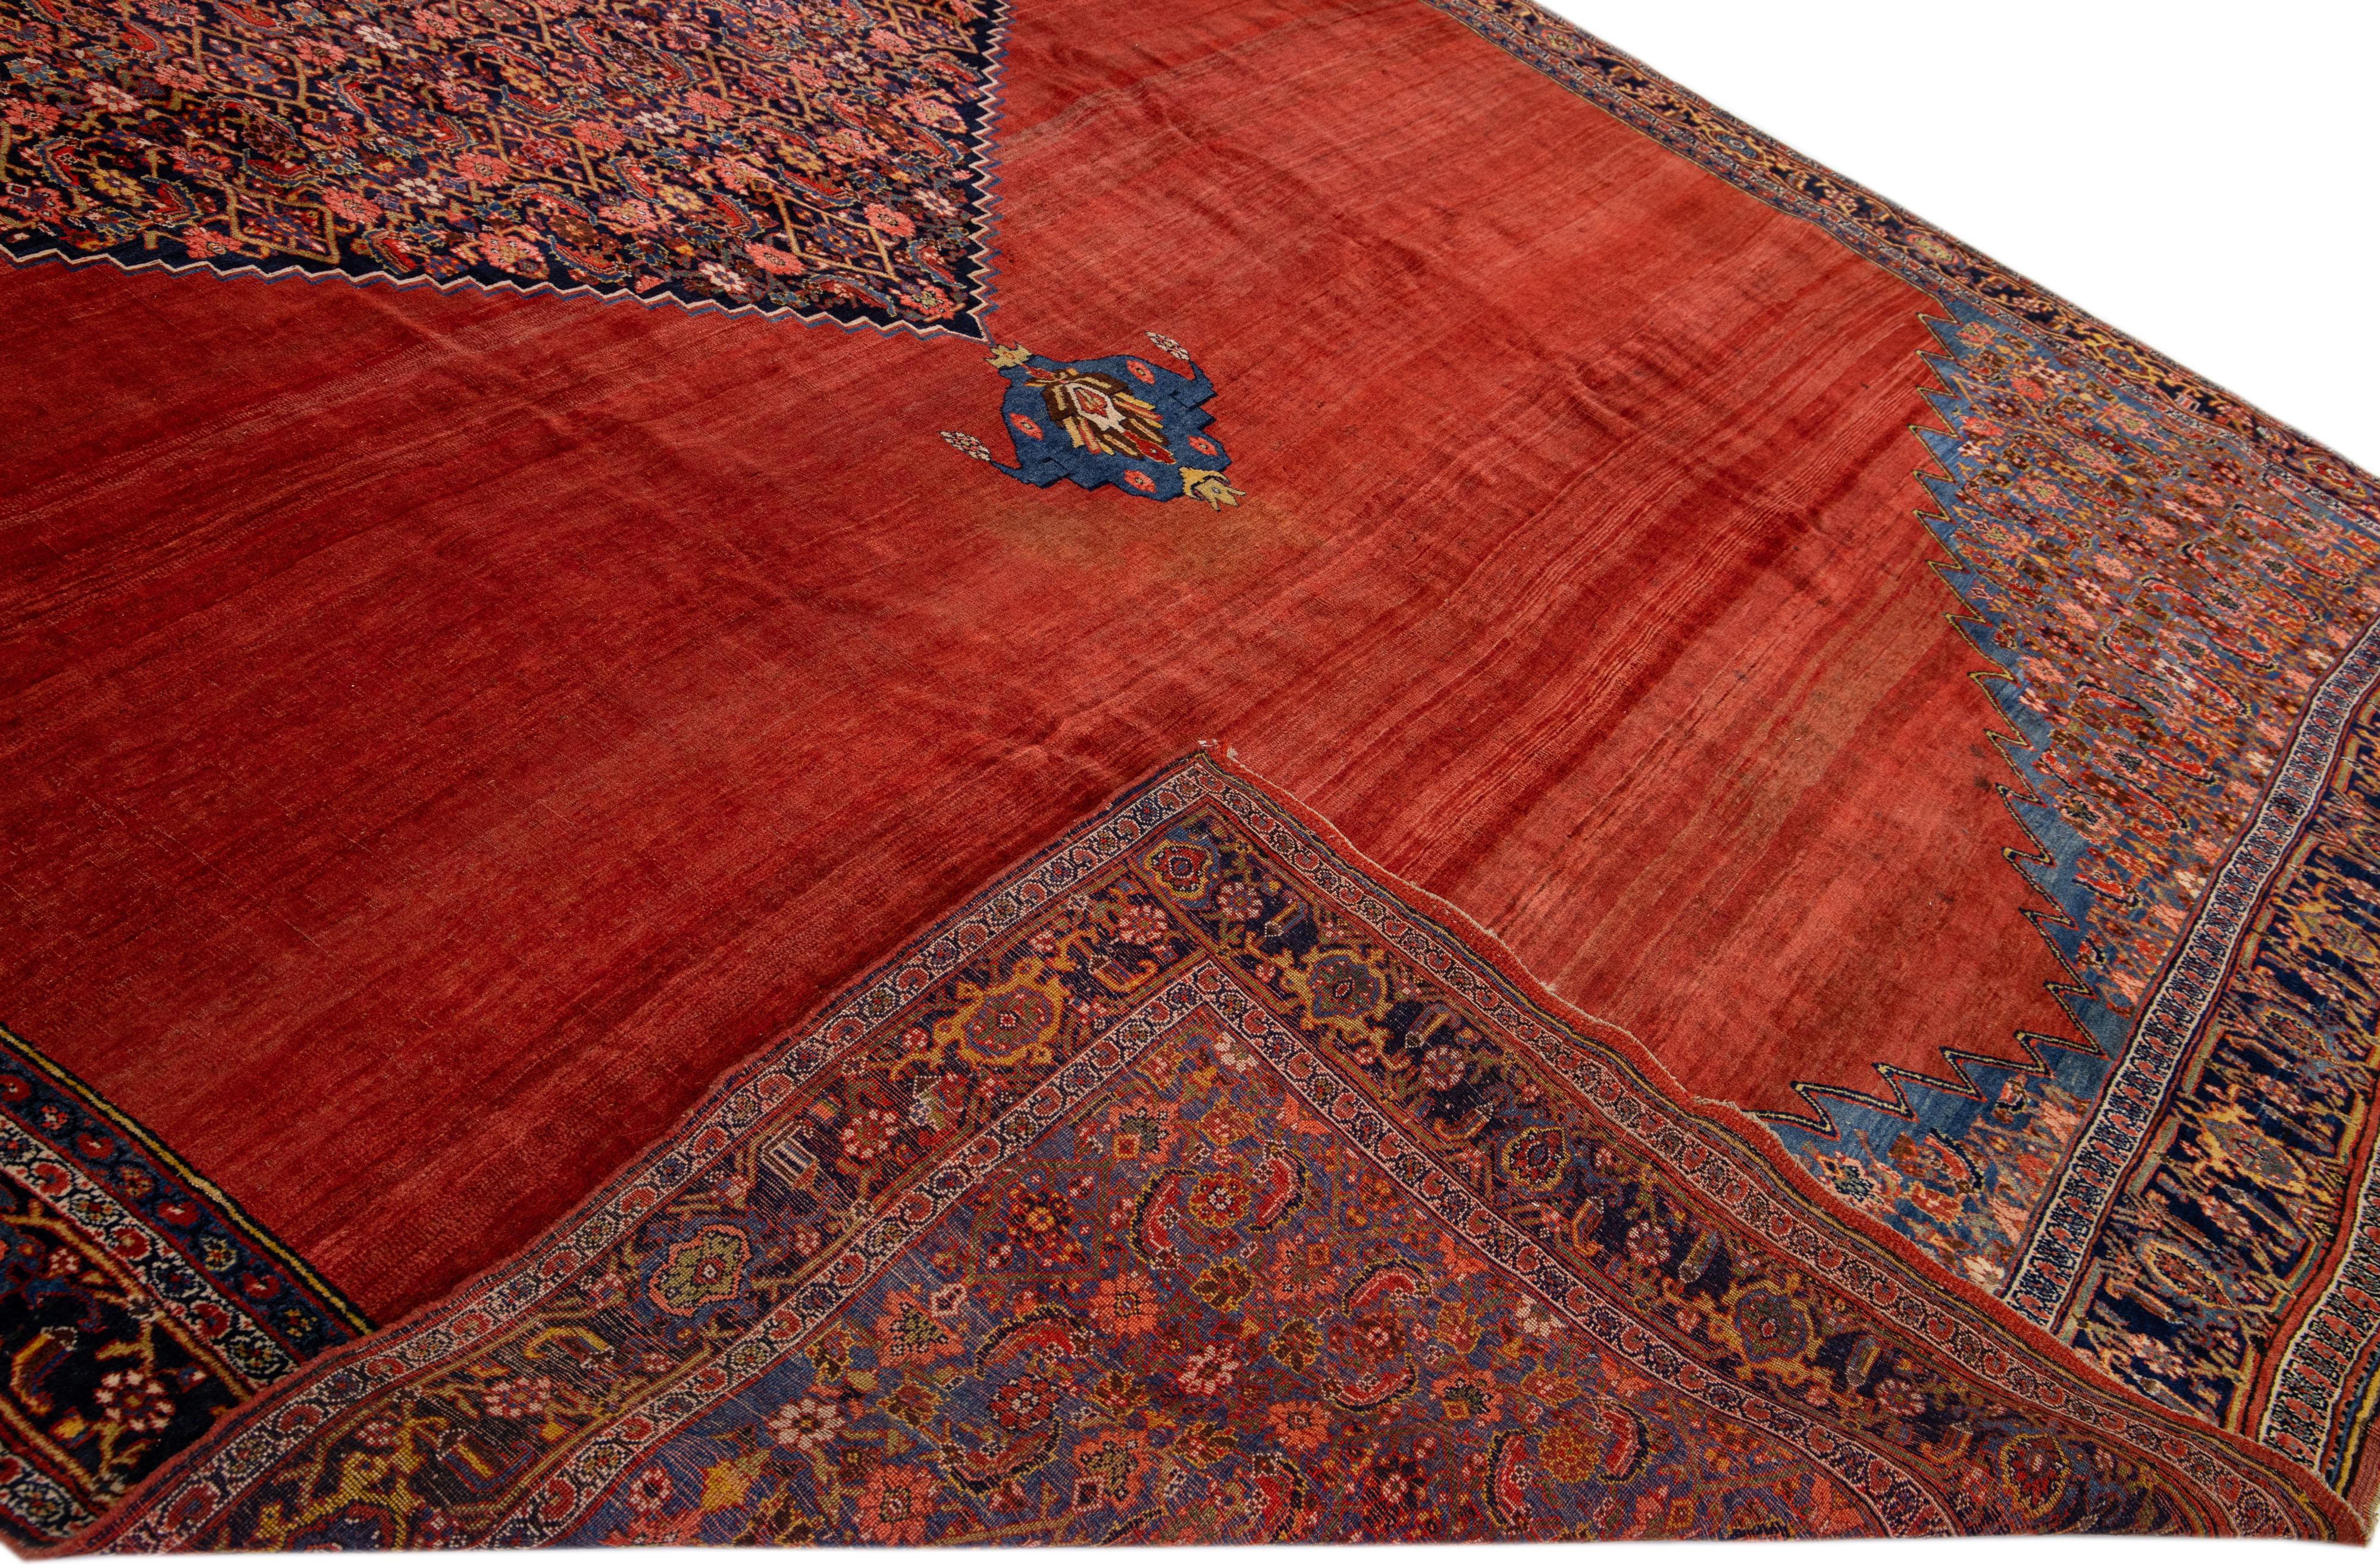 Beautiful antique Bidjar hand-knotted wool rug with a red field. This Persian rug has multicolor accents in an all-over center medallion design.

This rug measures: 11'9